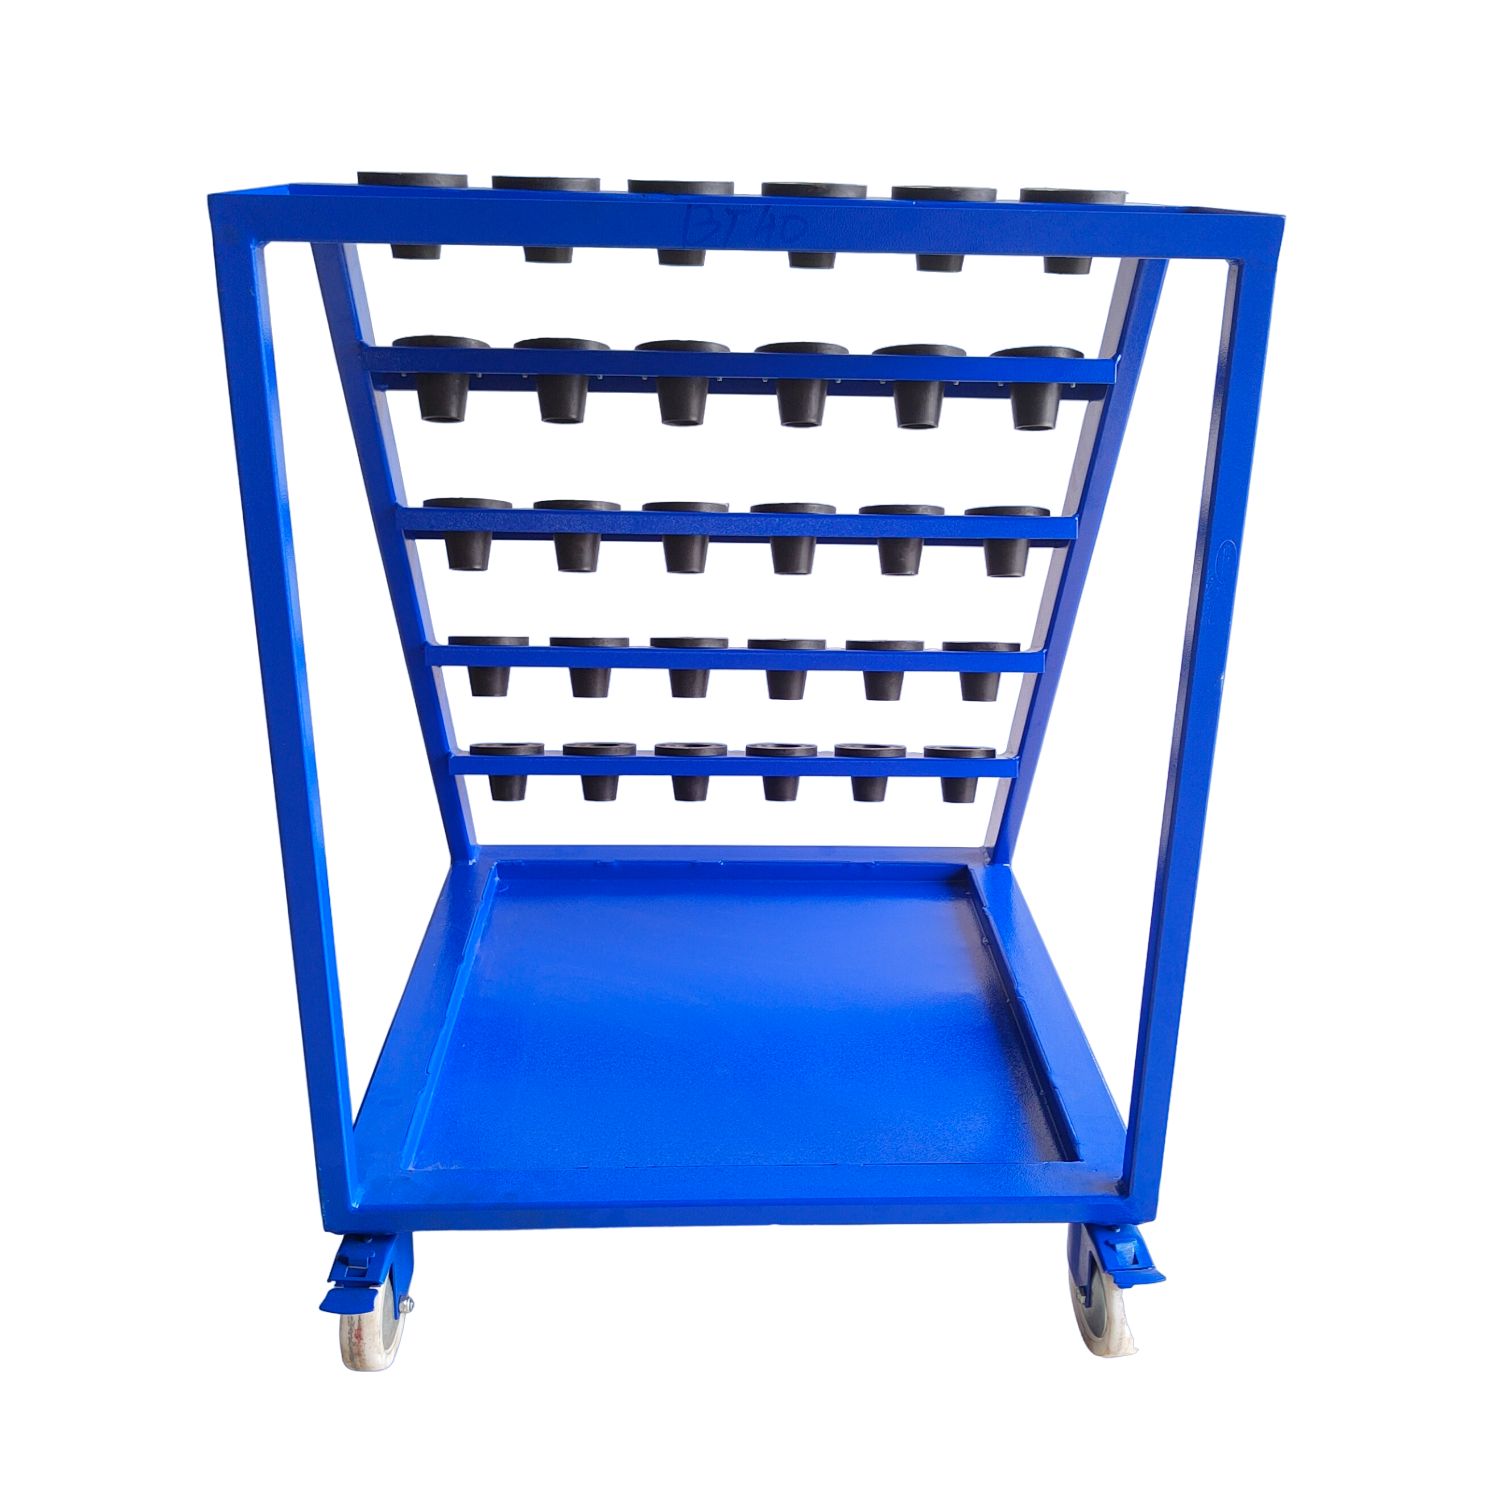 Technocart Tool Holder Trolley for BT-40 with 5 Racks & 30 Pockets